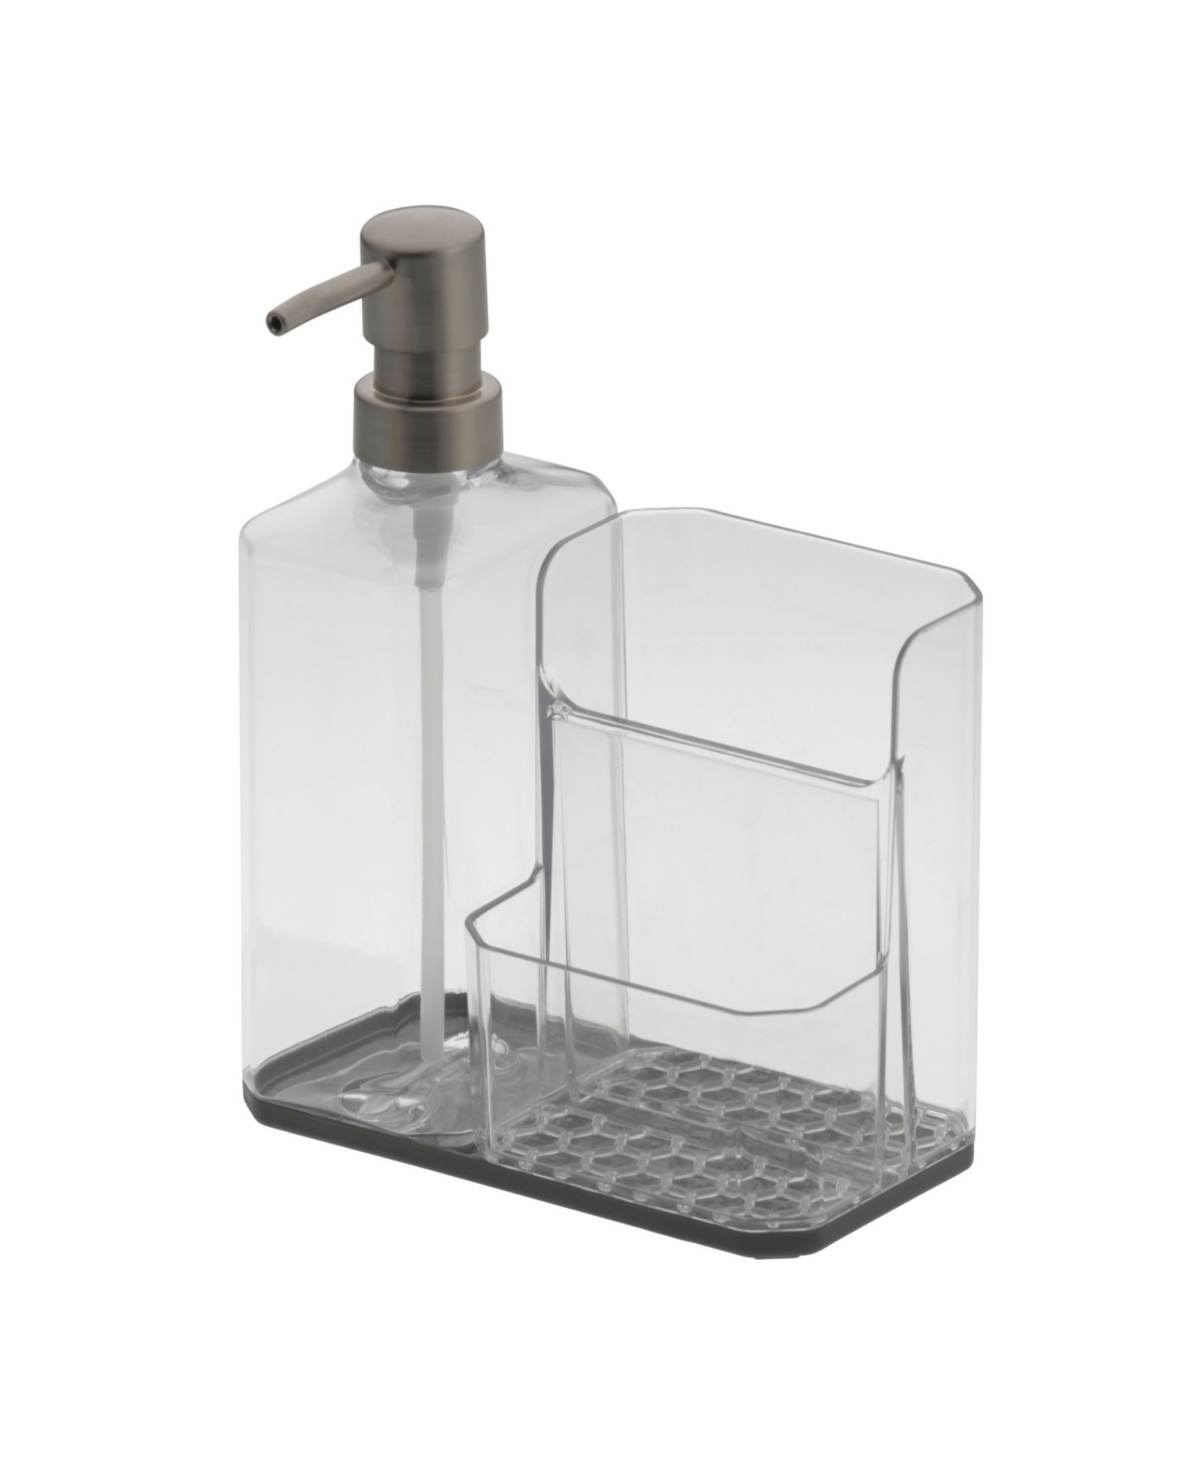 Diversified Hexa Sponge Brush Holder with Soap Pump - Clear and Dark Gray